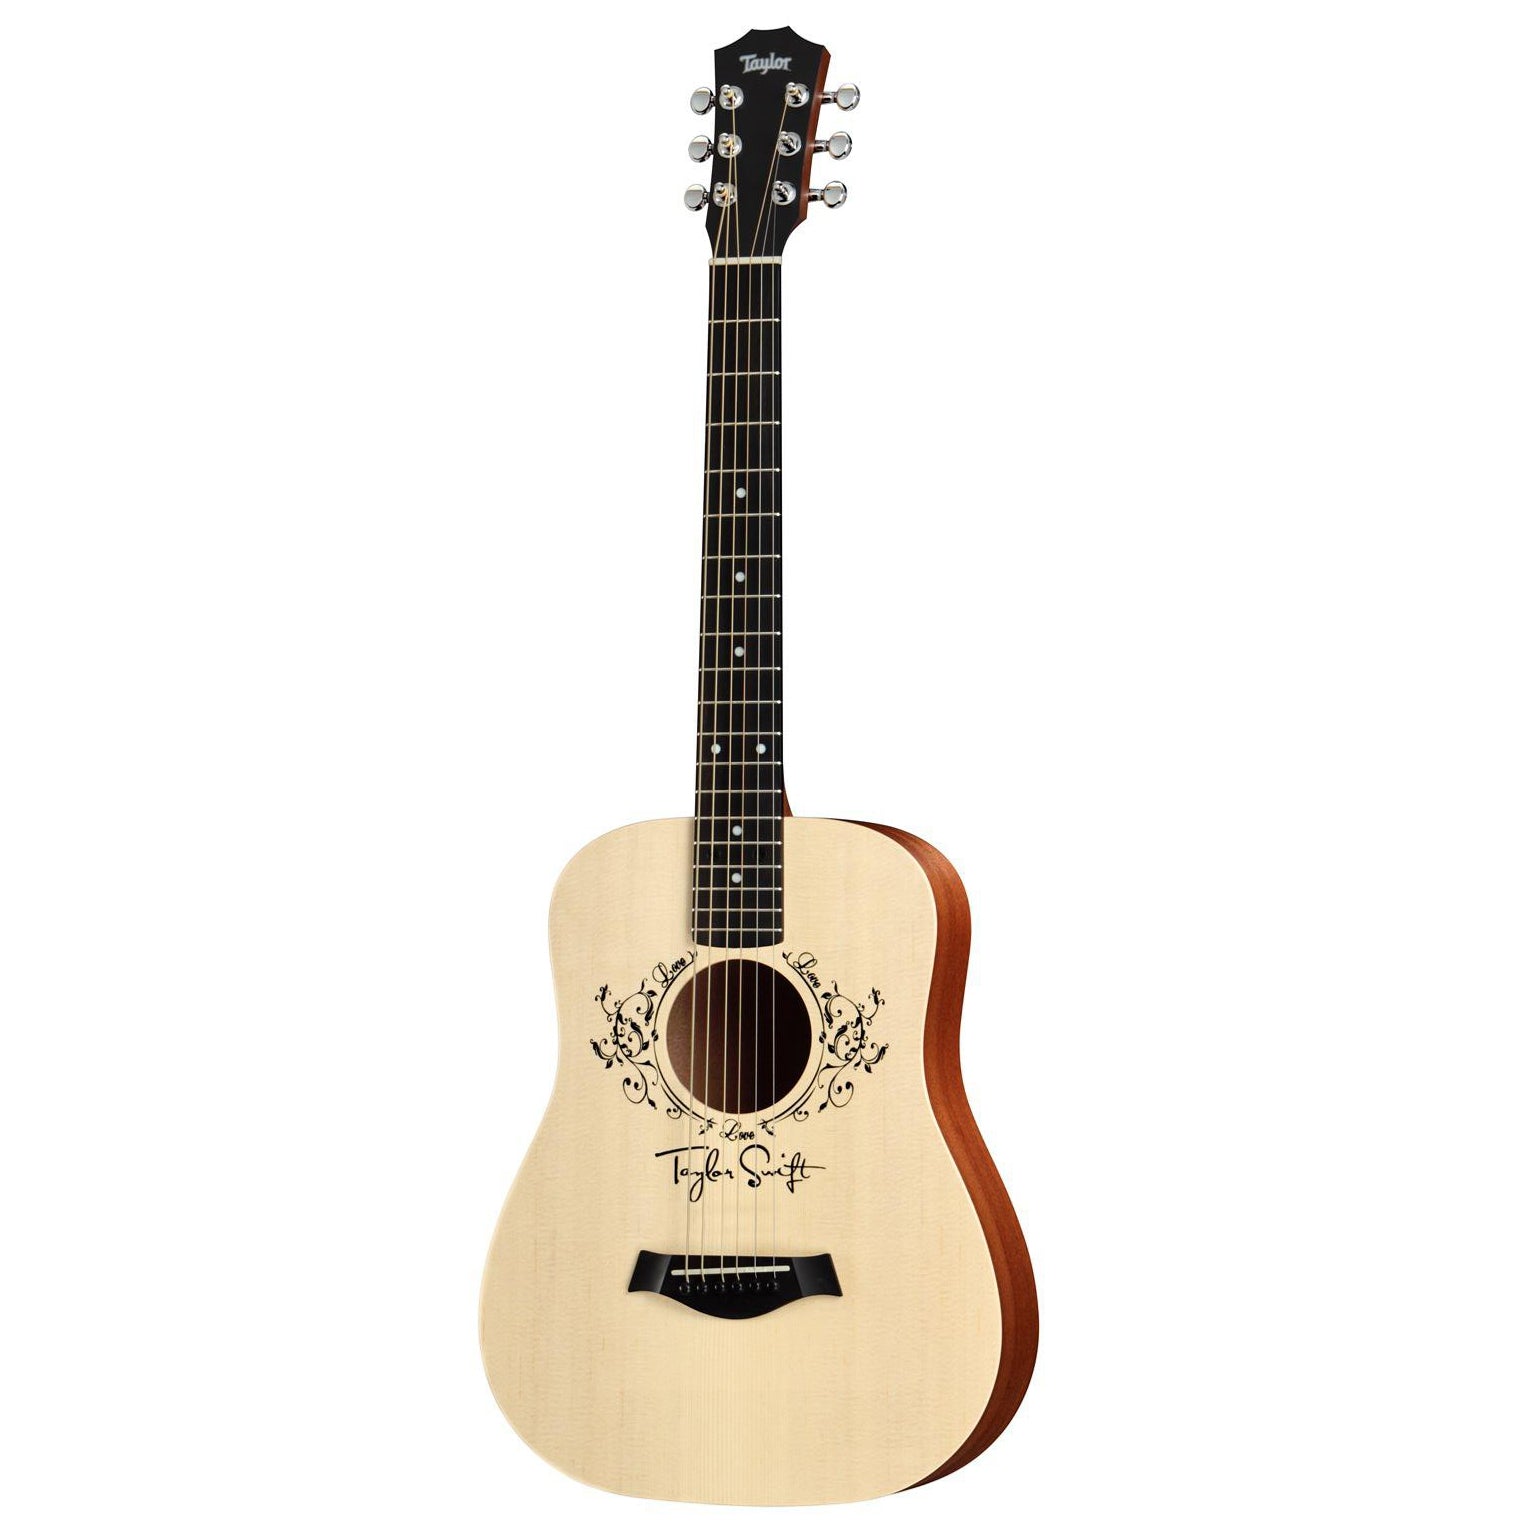 Taylor Baby Taylor Swift Signature Edition Acoustic Guitar